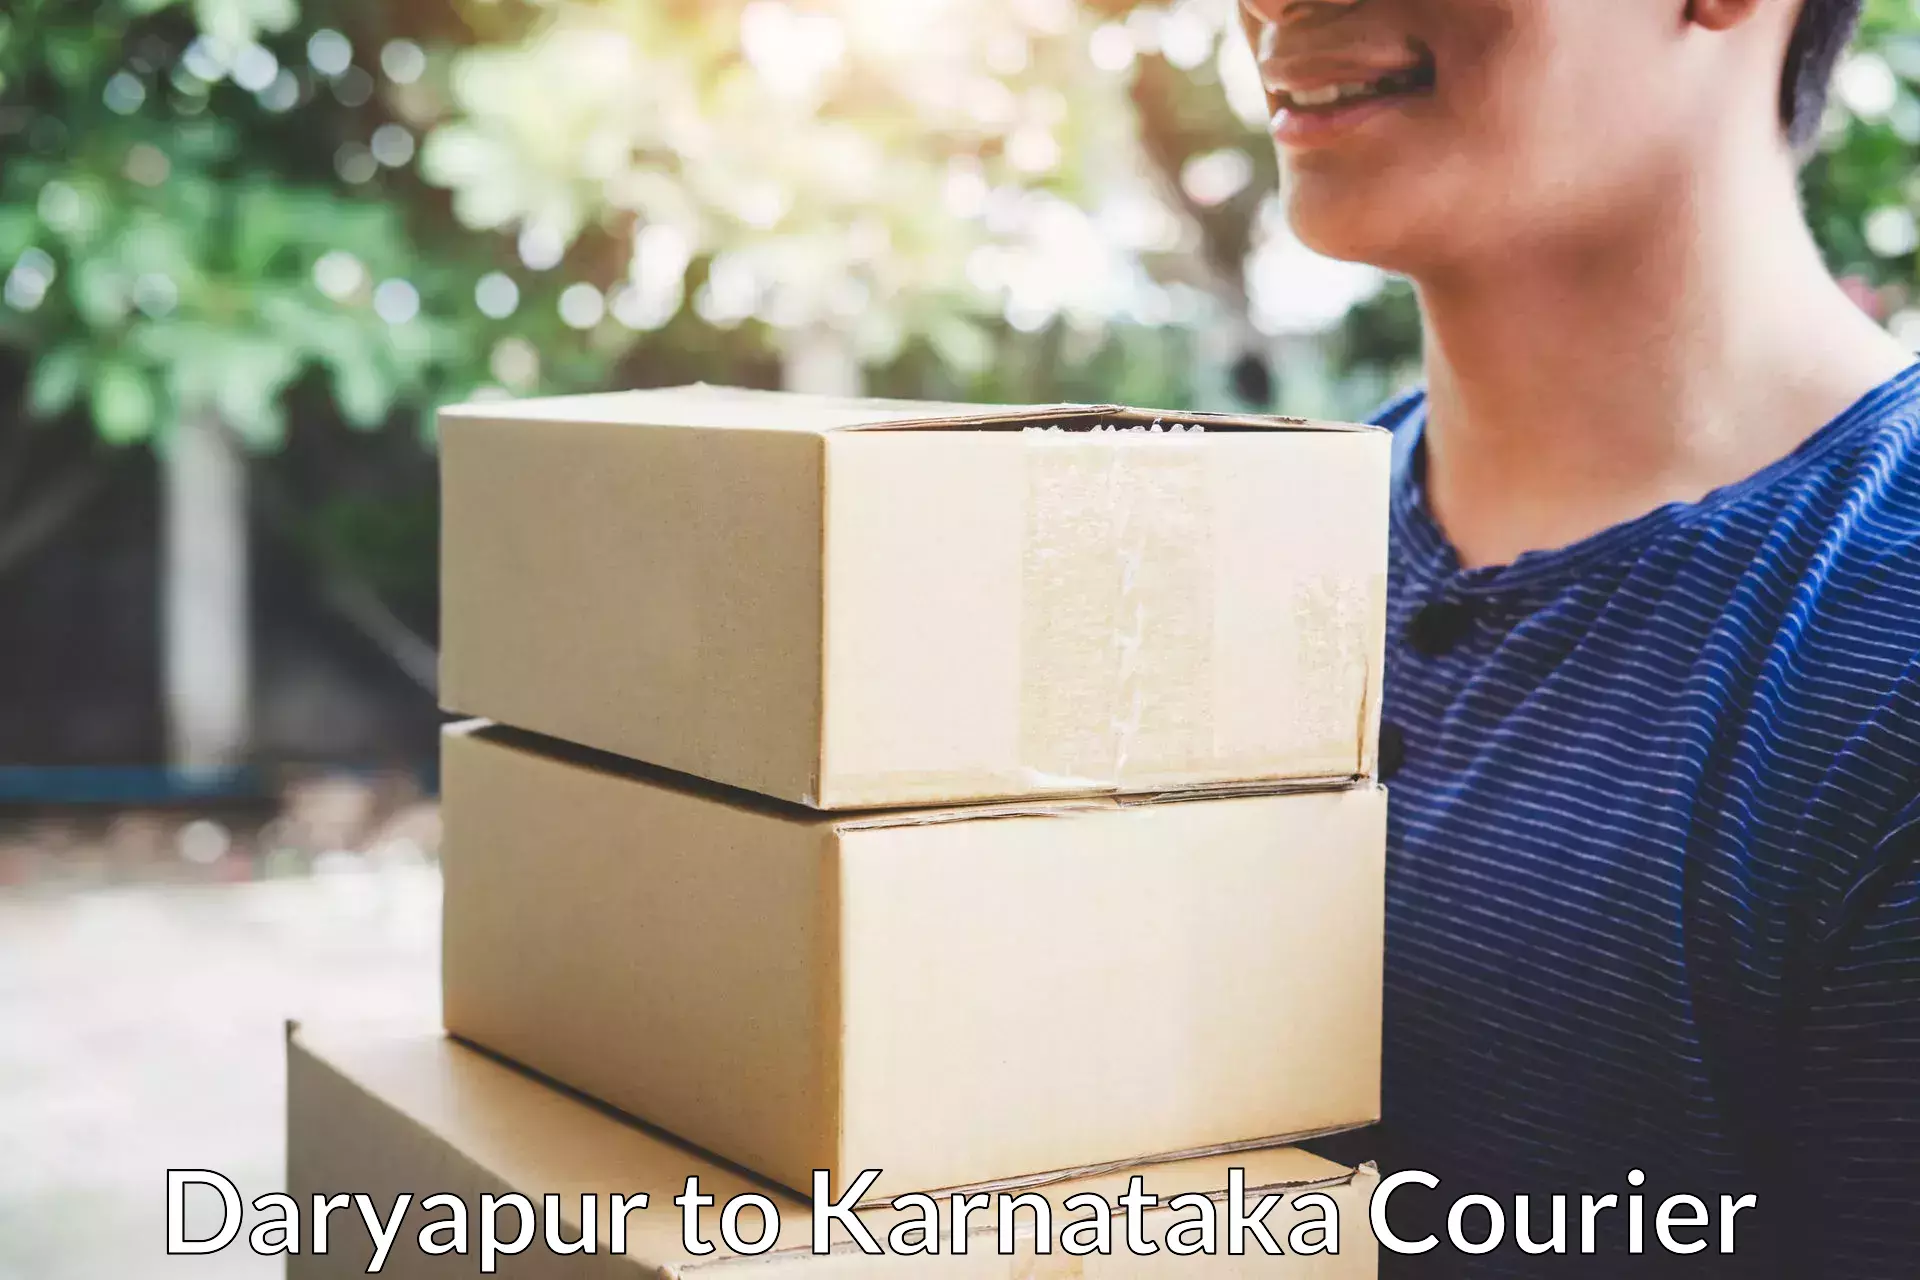 Furniture delivery service Daryapur to Udupi